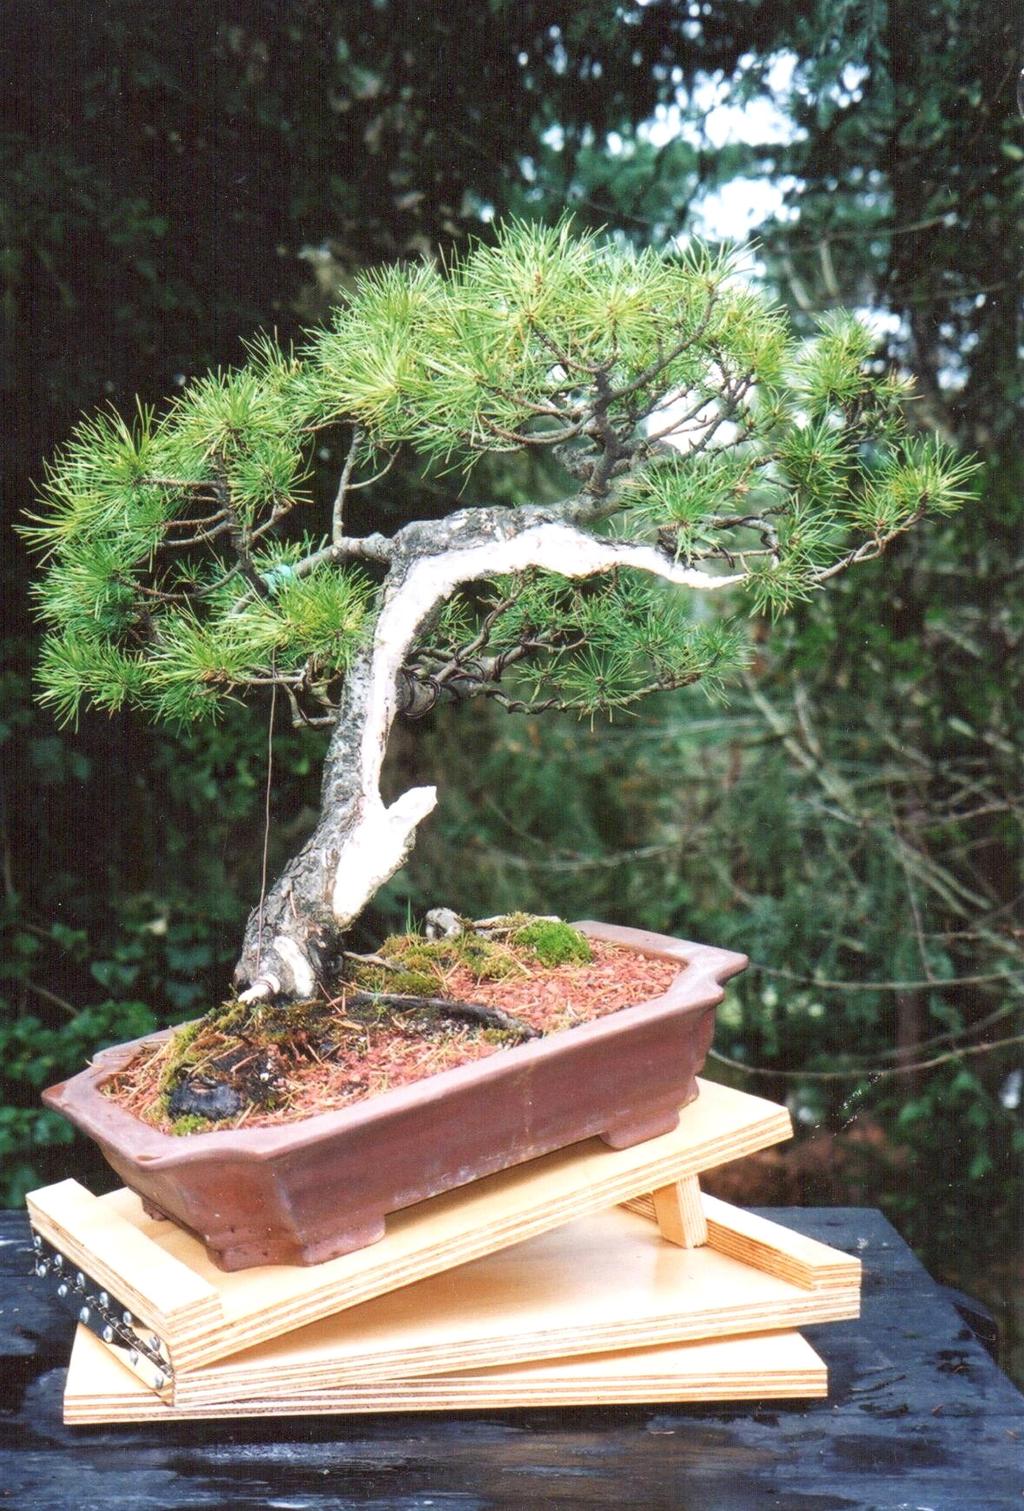 A Tilting Bonsai Turntable The design for this convenient turntable was adapted from one seen at a California Convention several years ago.